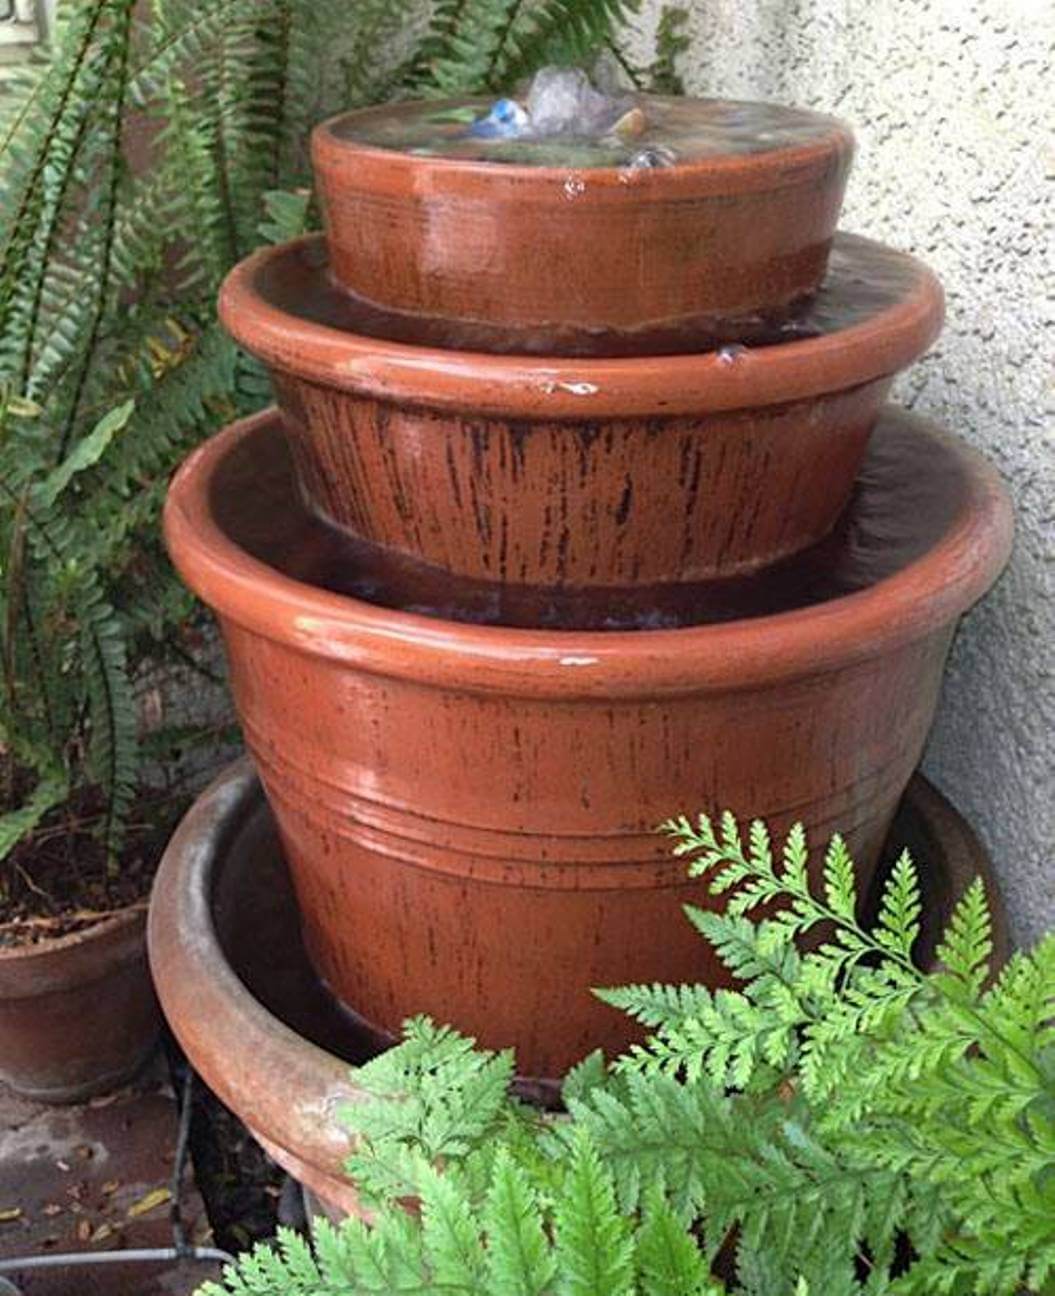 Babbling and Bubbling Brook in Tiered Pots